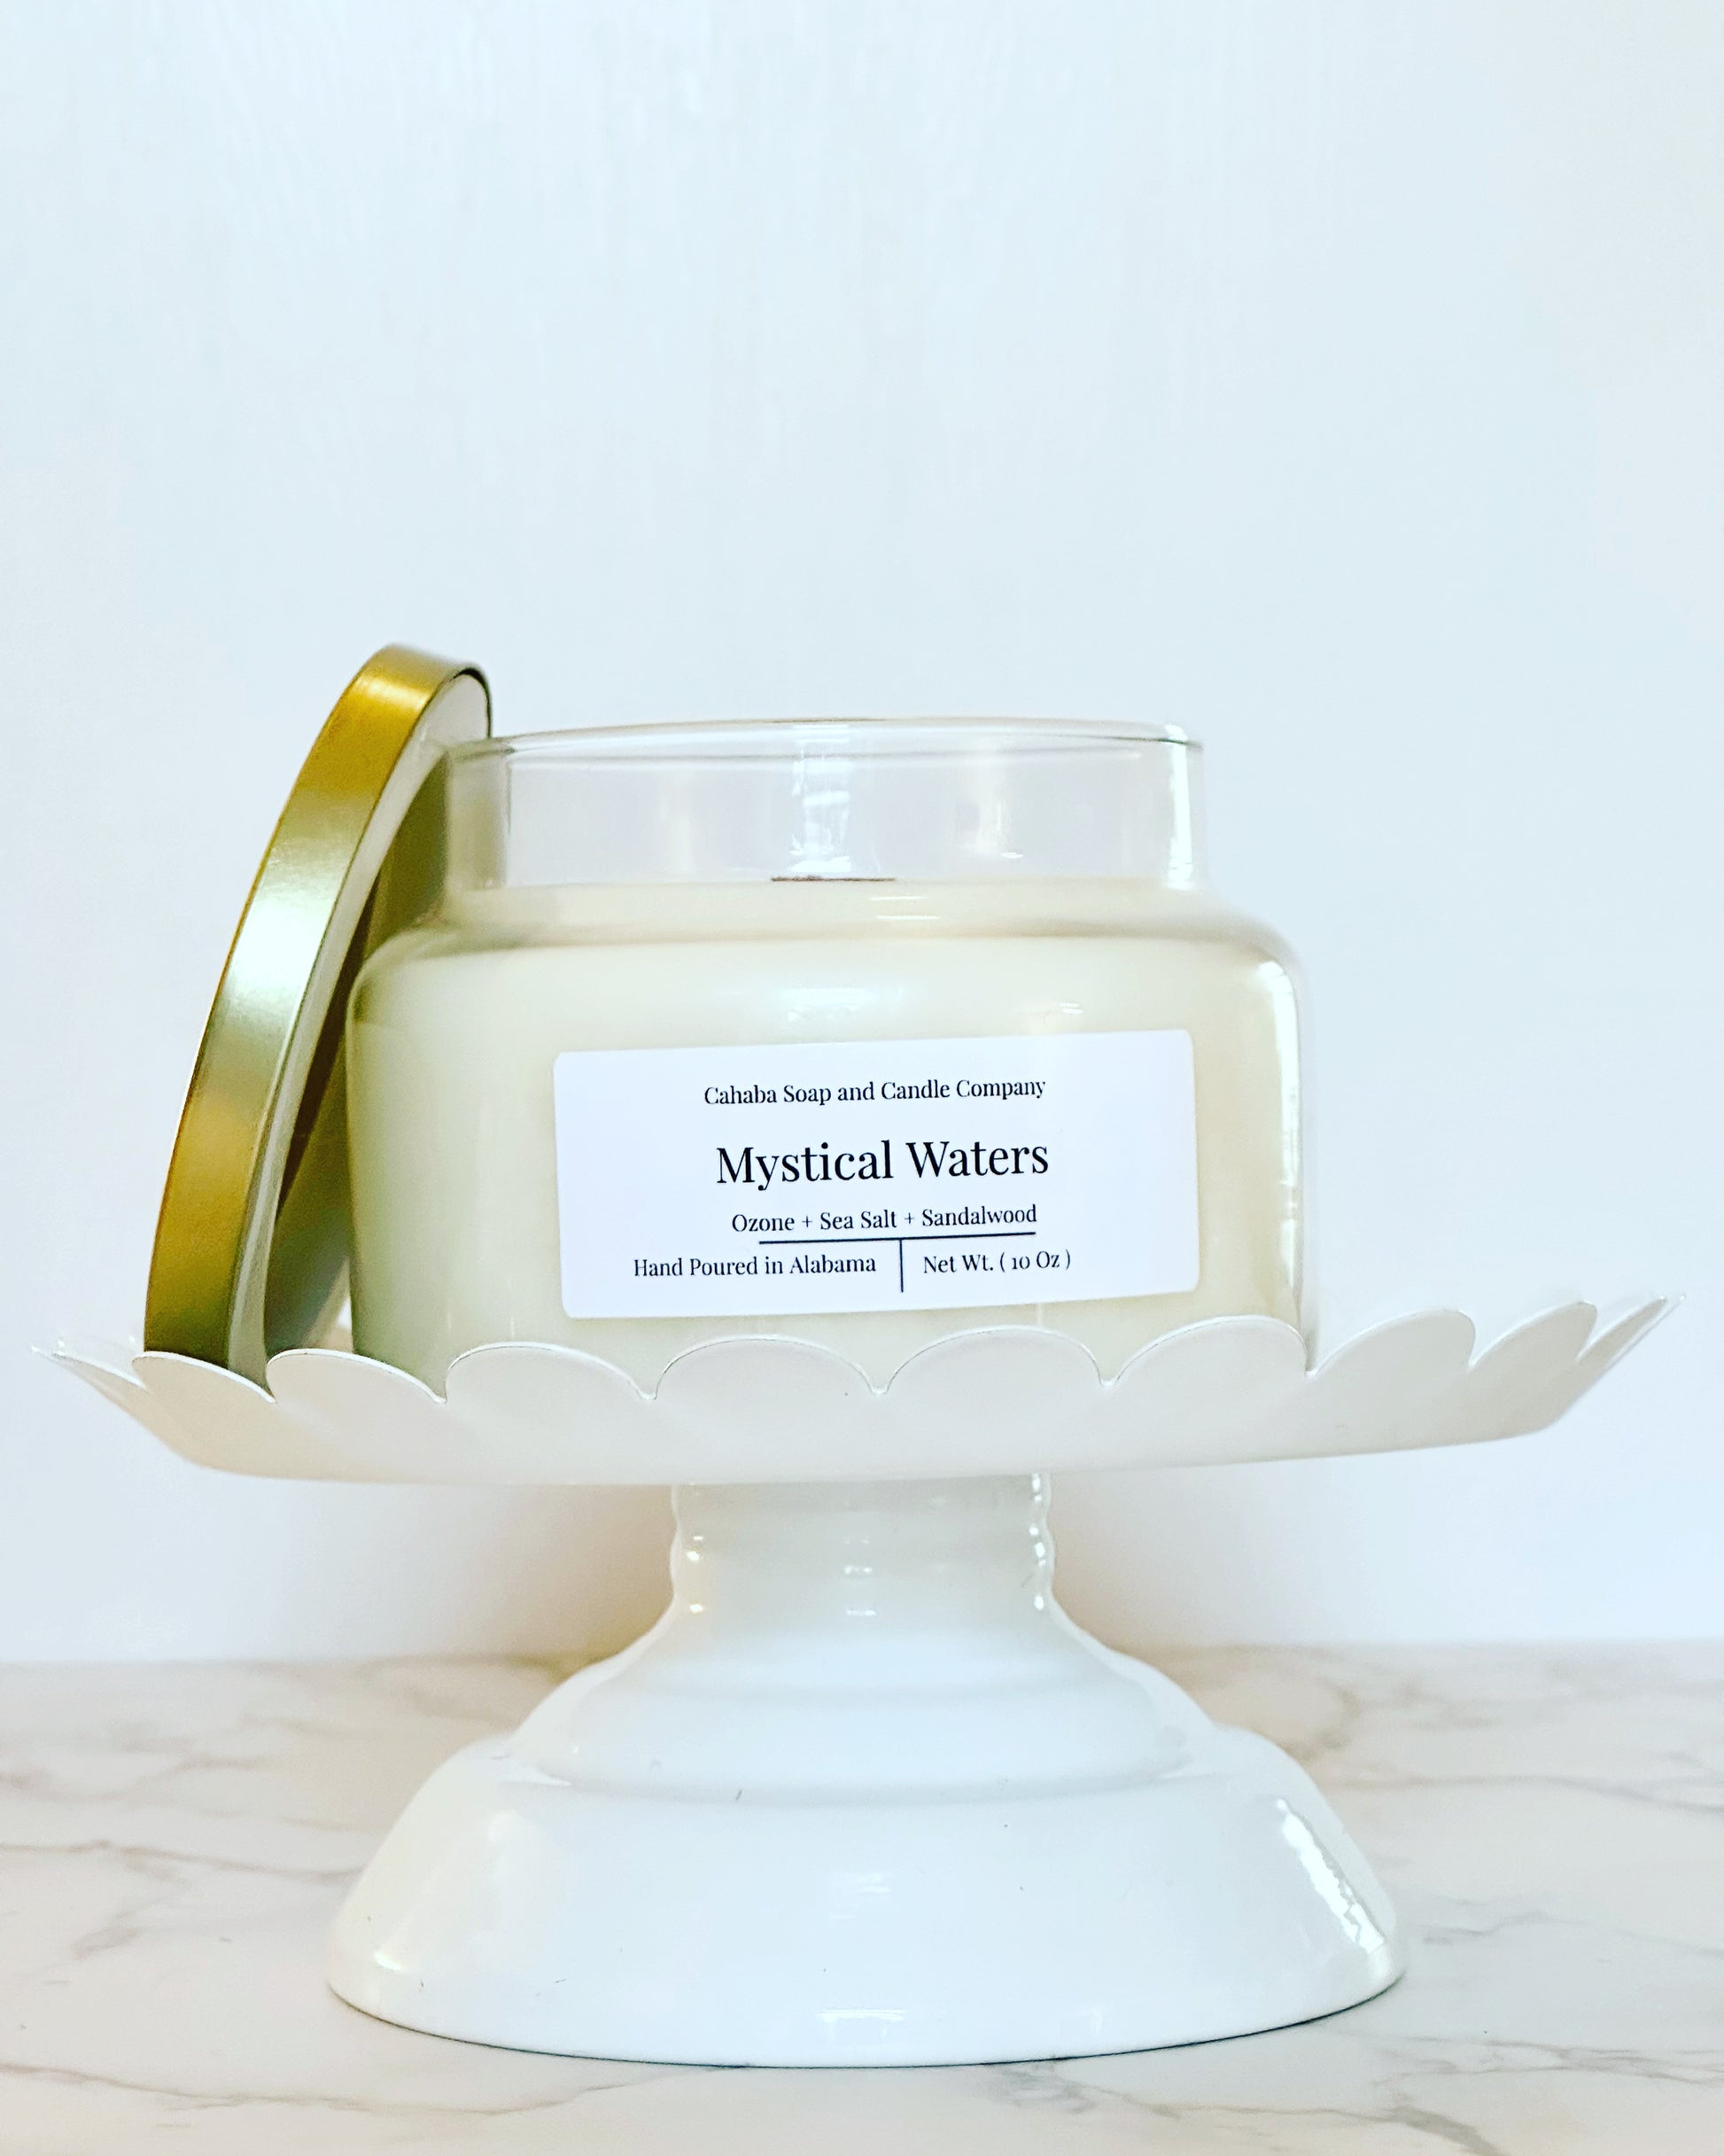 Mystical Waters - Cahaba Soap and Candle Company